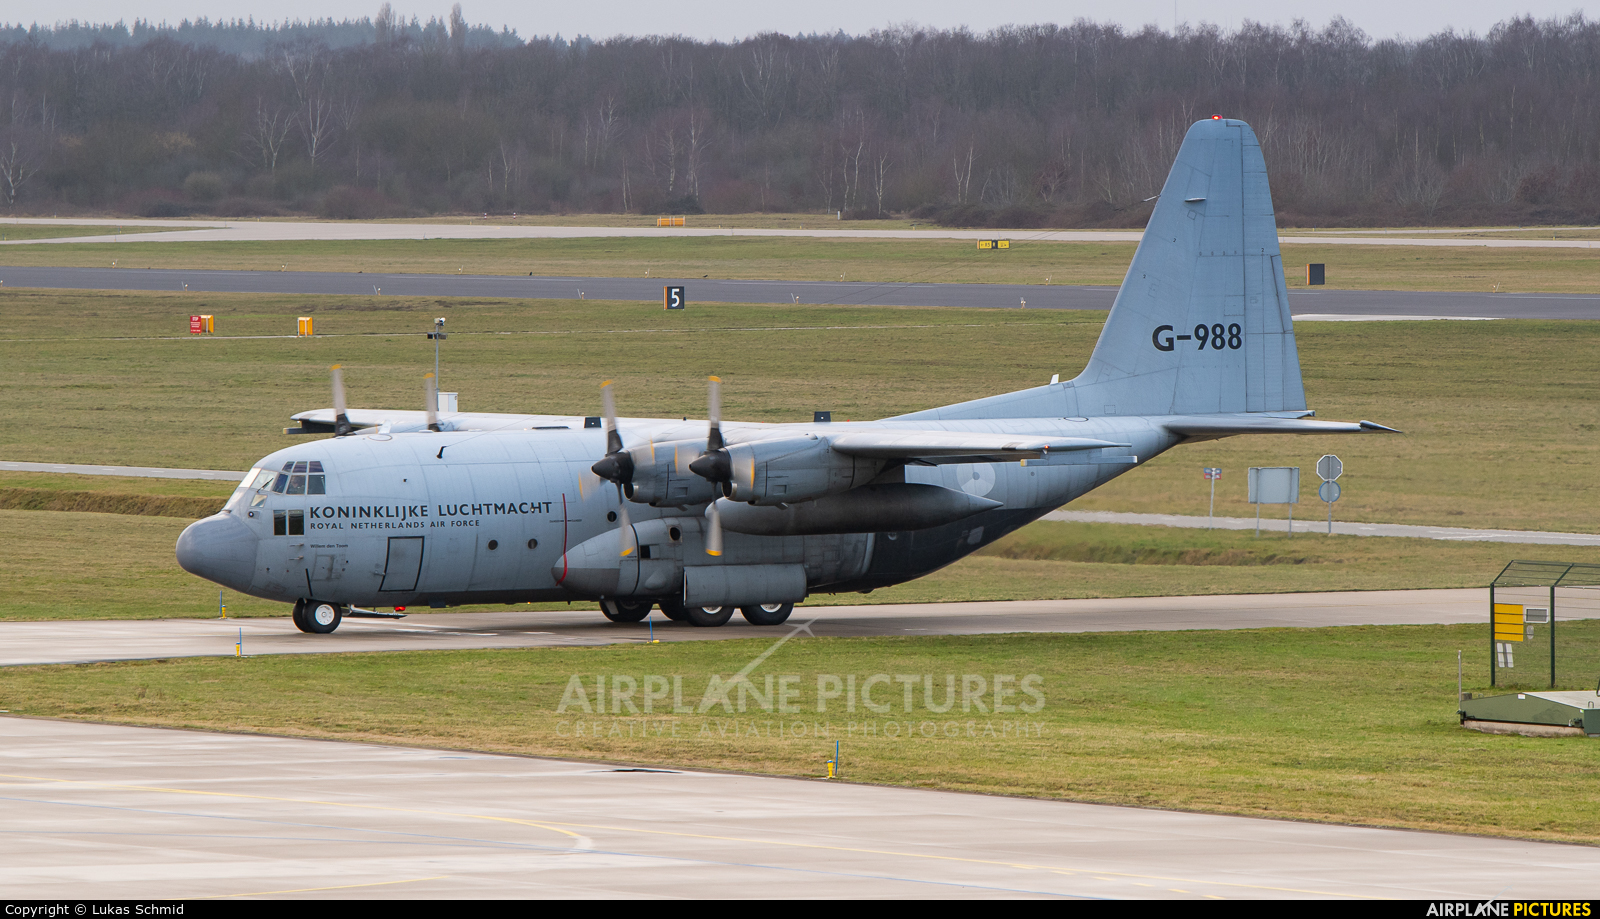 Netherlands - Air Force G-988 aircraft at Eindhoven